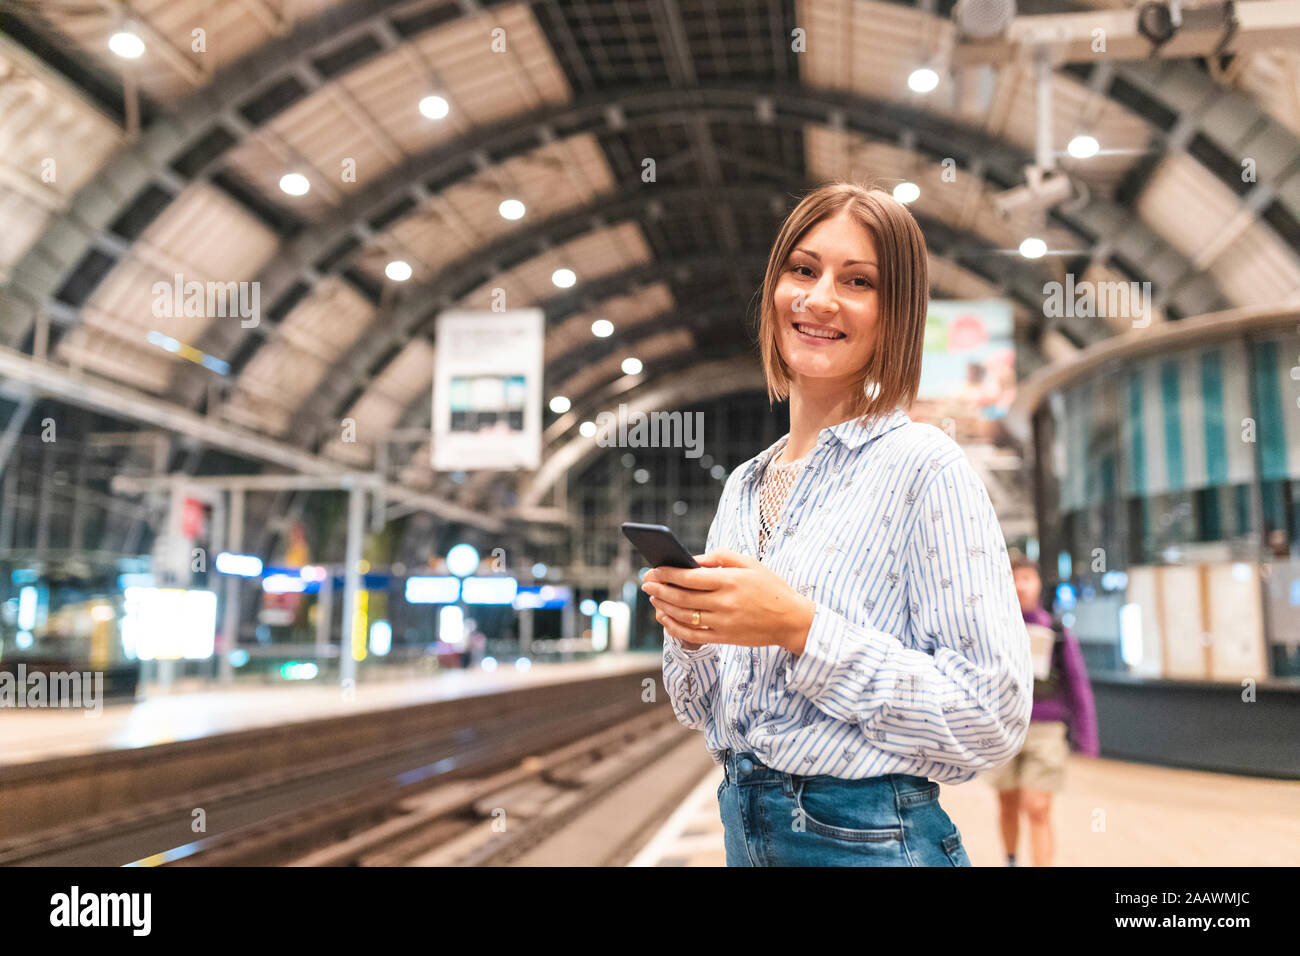 Young smiling woman using smartphone sur gare Banque D'Images